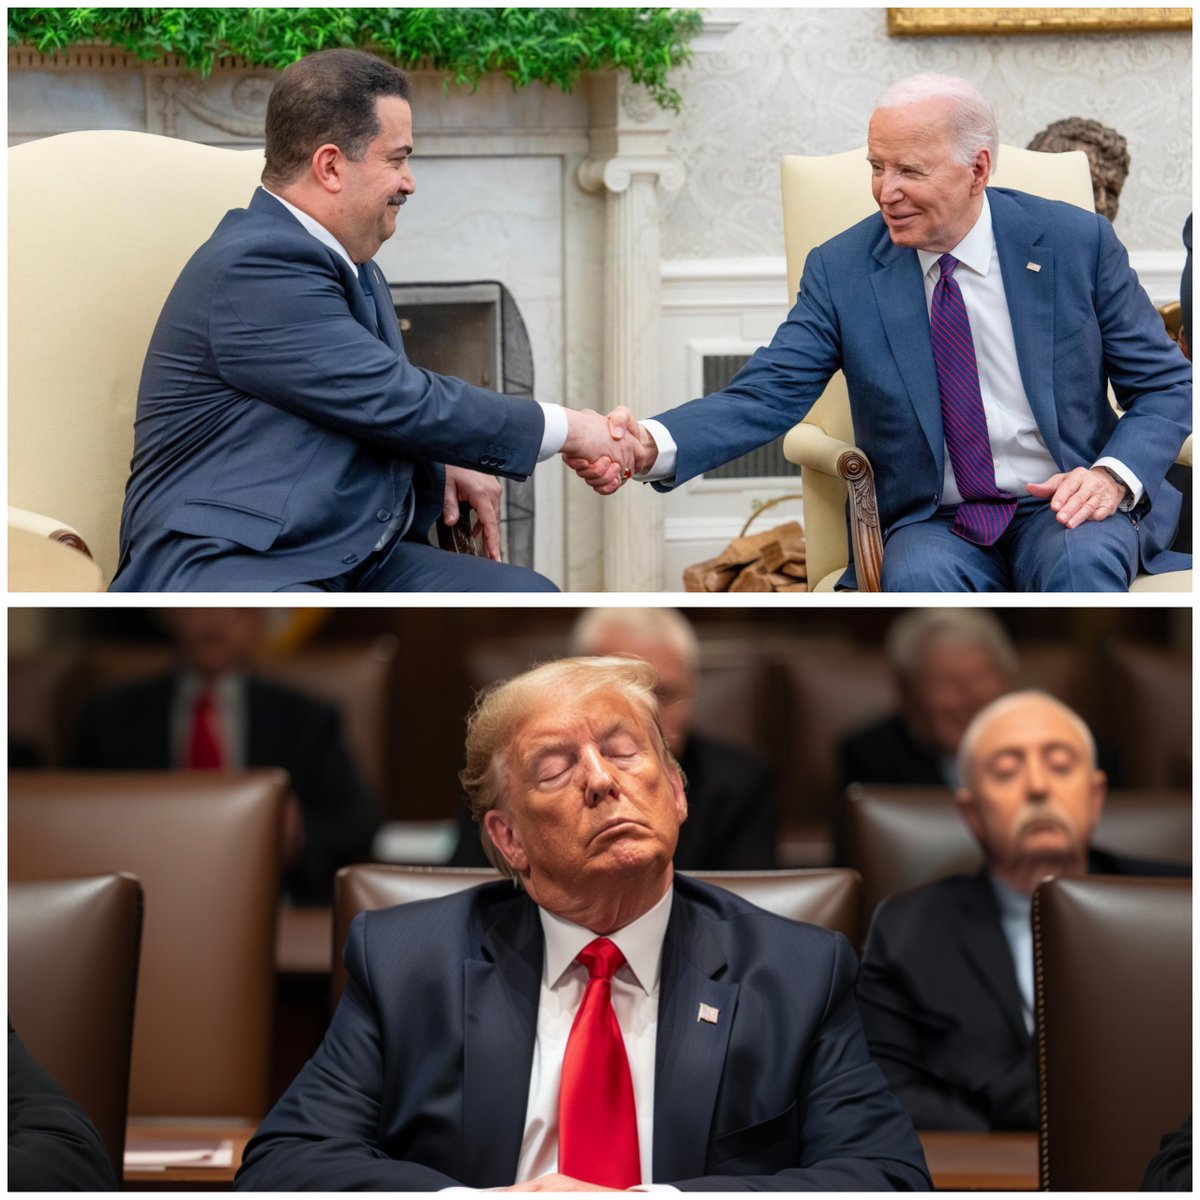 📸 What a contrast! While President Biden was practicing diplomacy with the prime ministers of Iraq and the Czech Republic today, Donald Trump was dozing off at this hush-money porn trial. Amazing. #SleepyDon